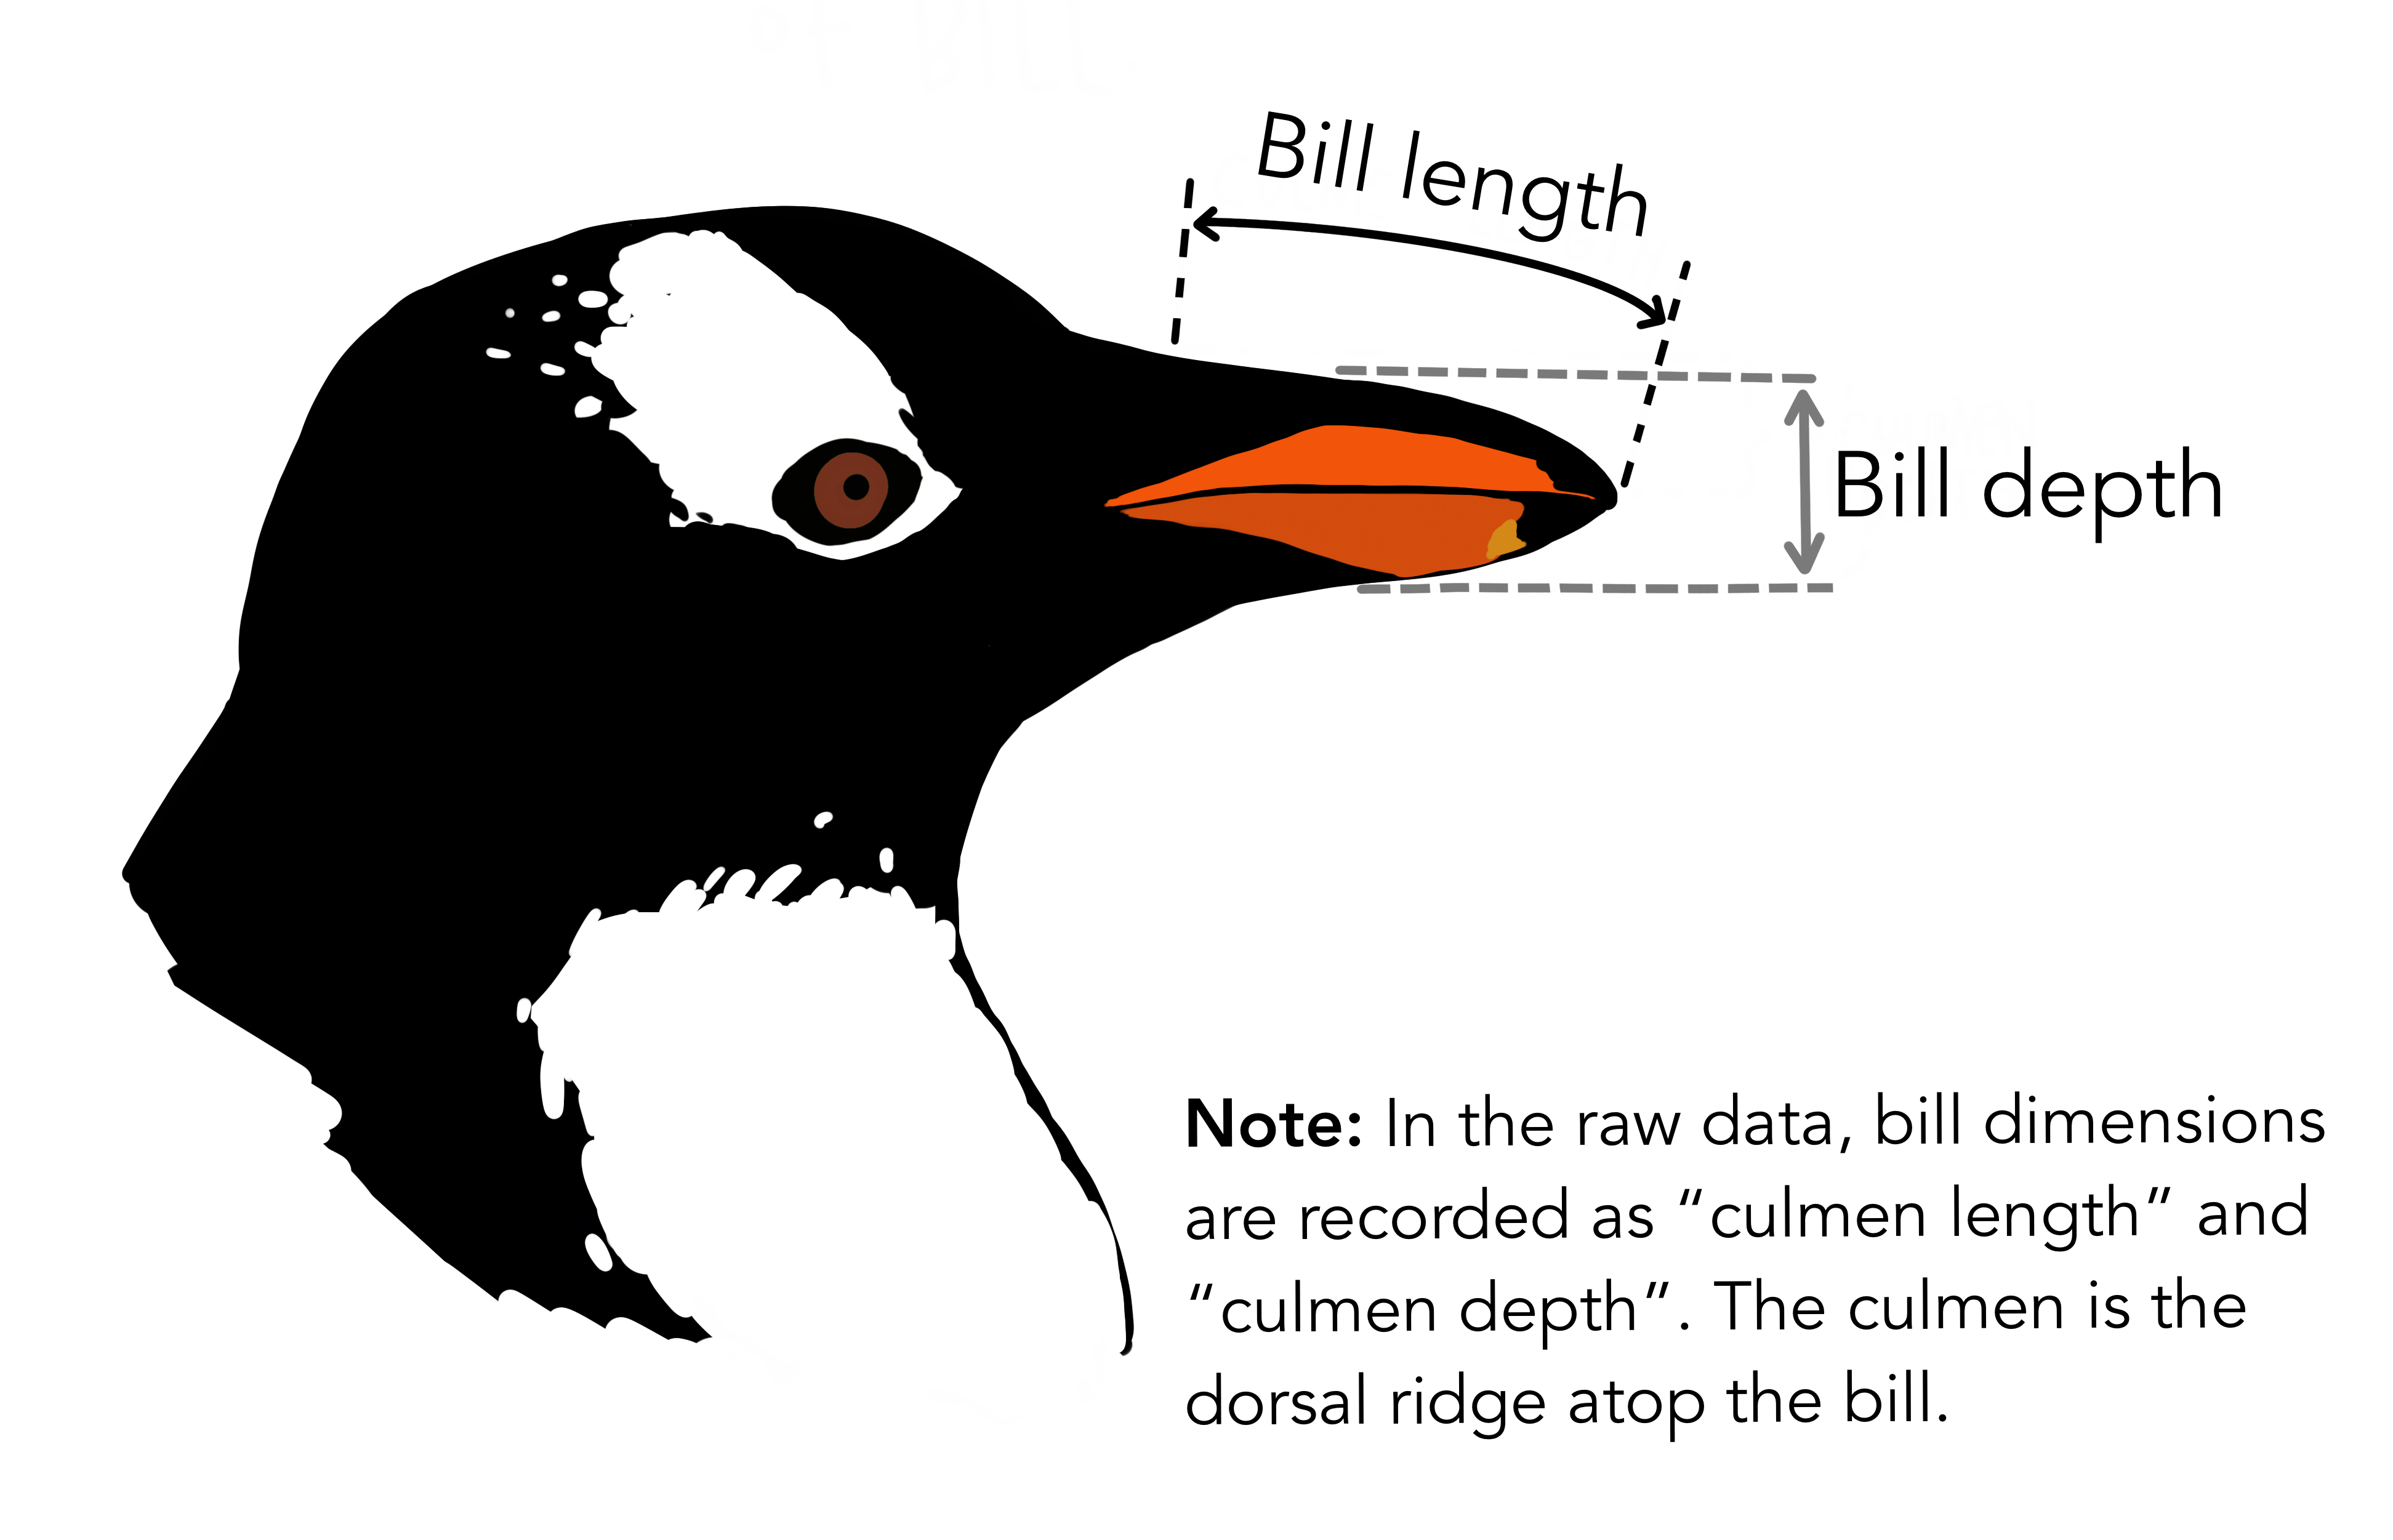 depiction of bill length protruding from the penguins face, and bill depth, the height of the bill parallel to the ground